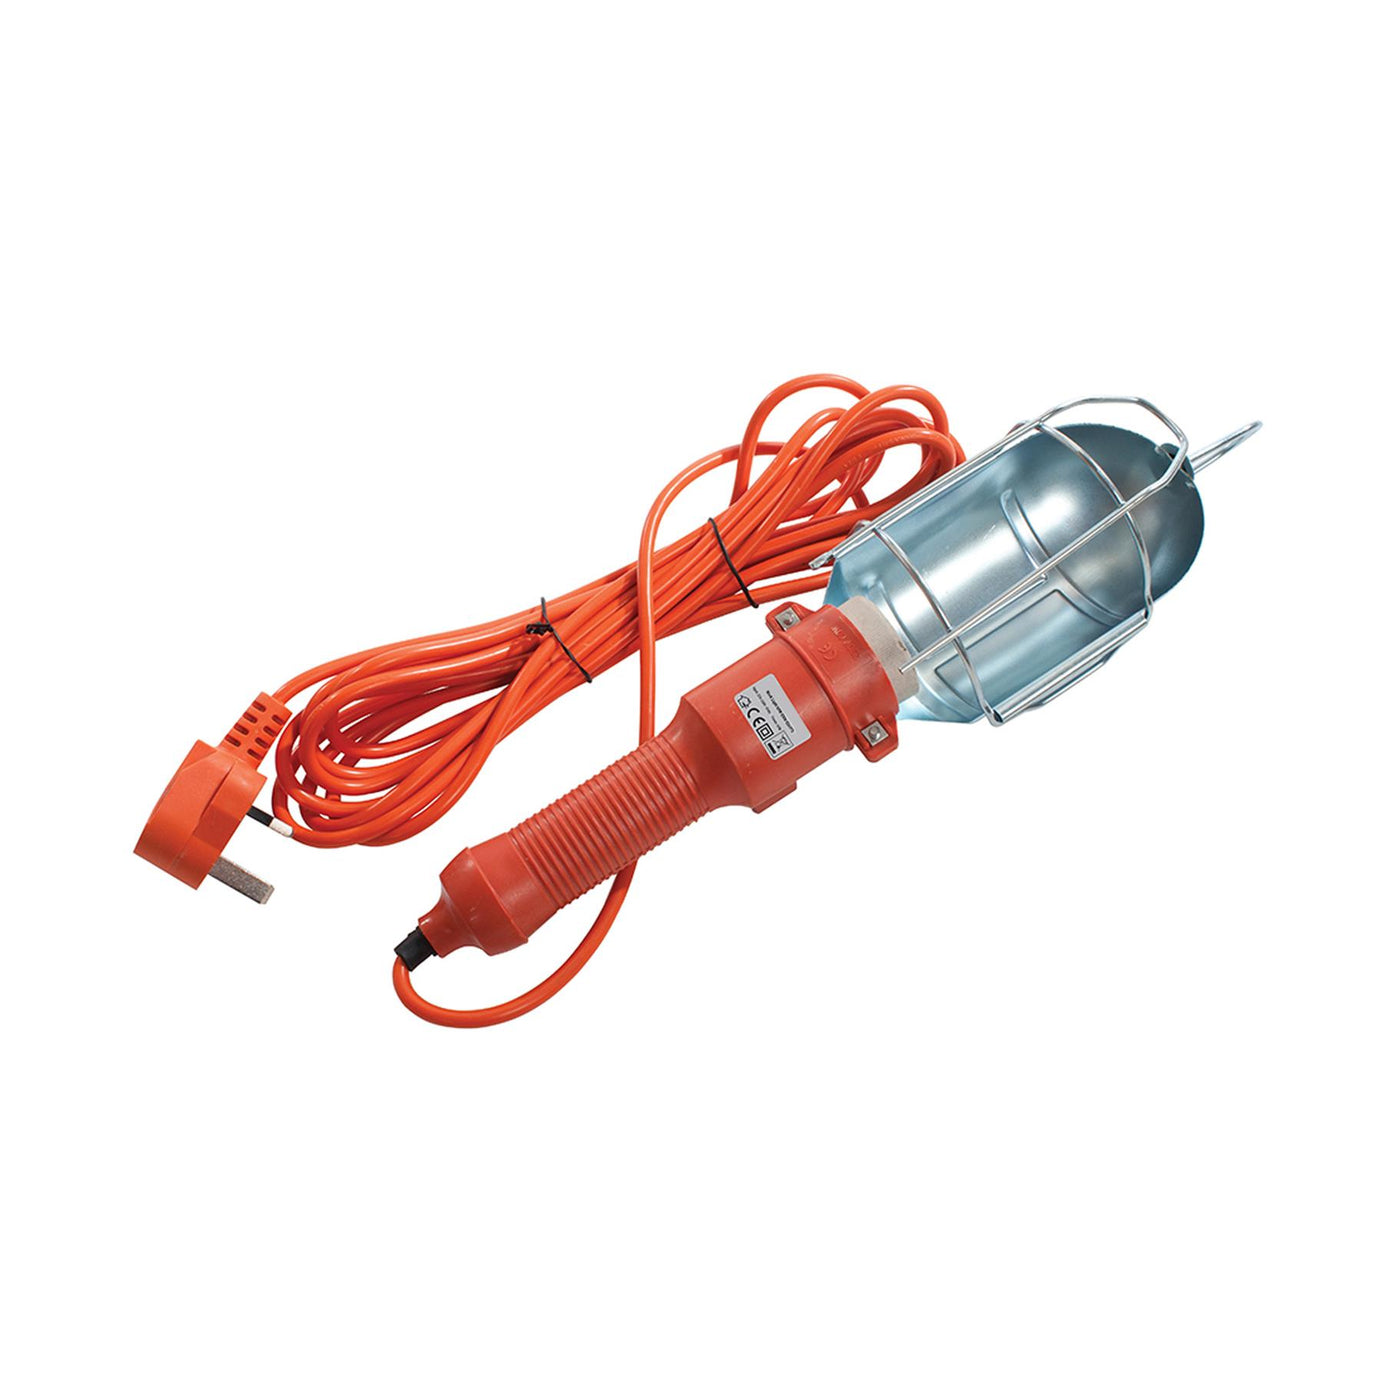 Portable Work Light Inspection Lamp 60W 240V Protective Cage Length 400mm